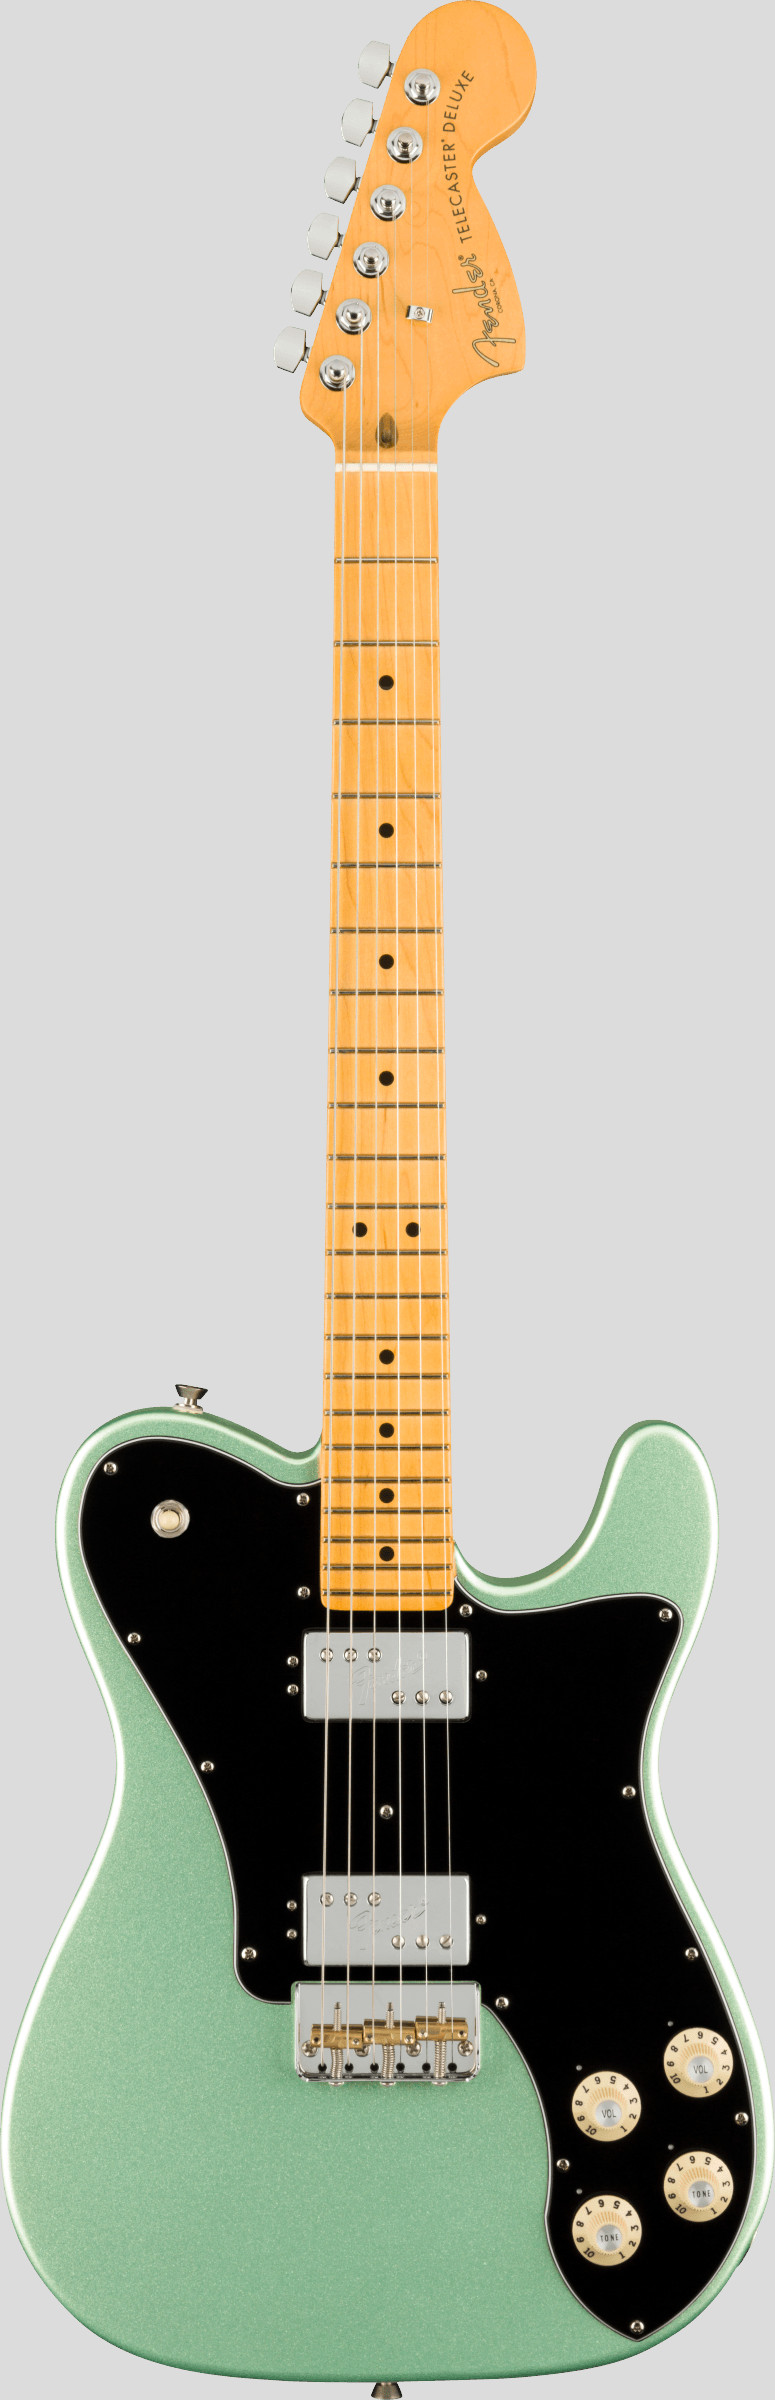 Fender American Professional II Telecaster Deluxe Mystic Surf Green 1